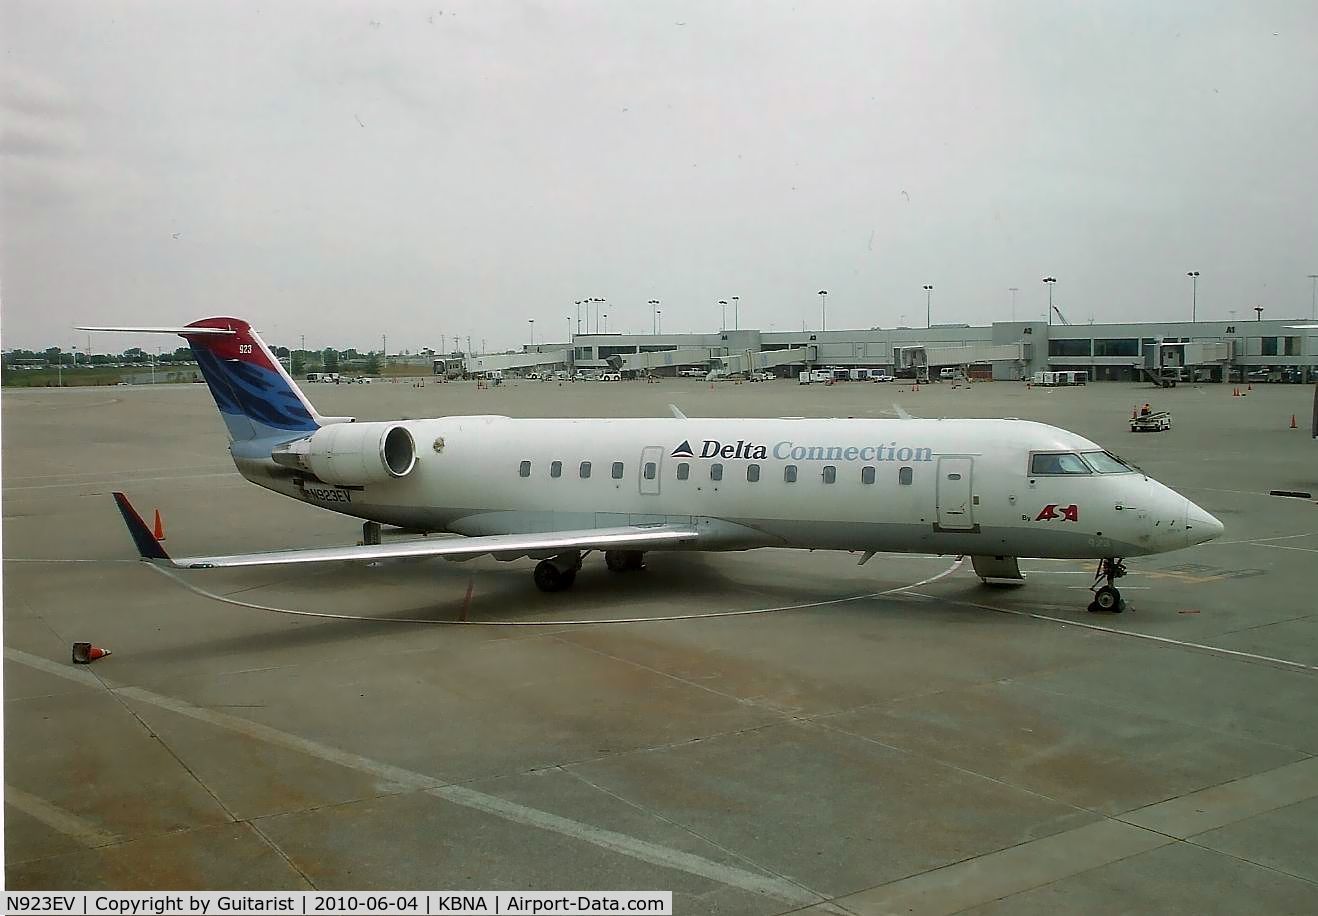 N923EV, 2003 Bombardier CRJ-200ER (CL-600-2B19) C/N 7826, Waiting for my connection to PHL